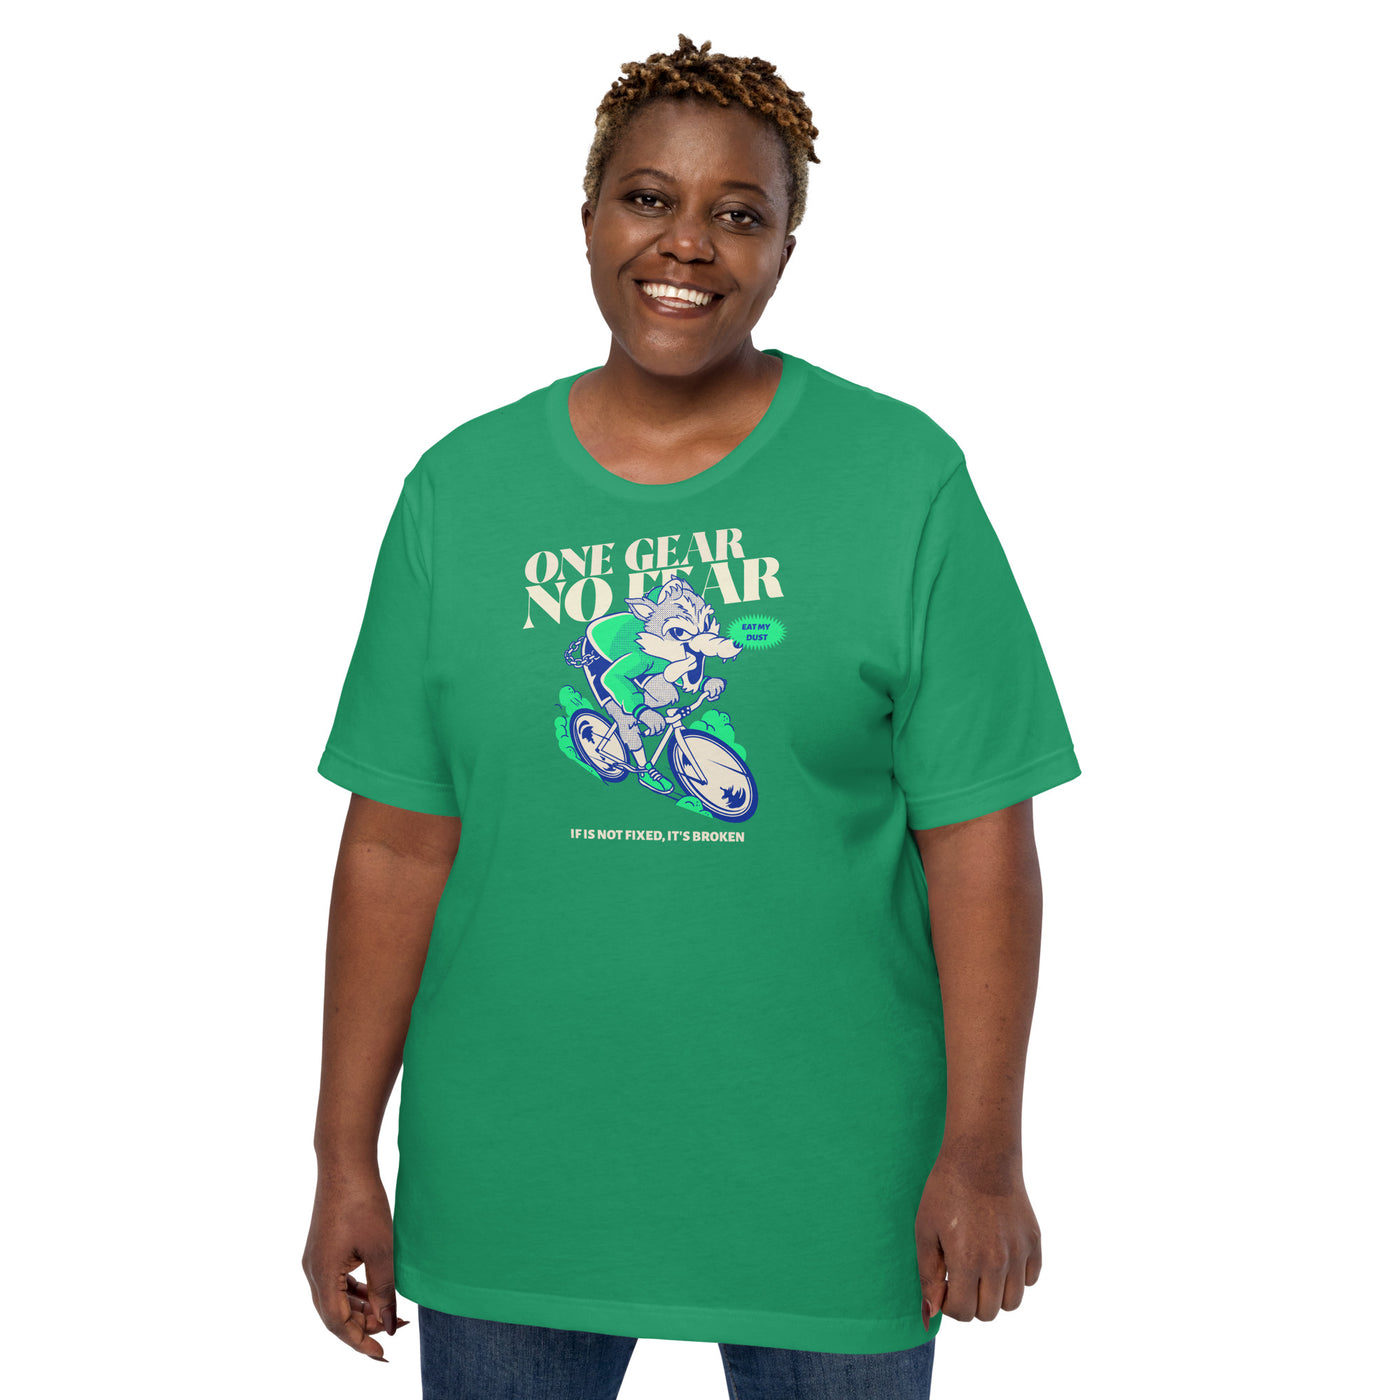 One Gear Plus Size T-shirt